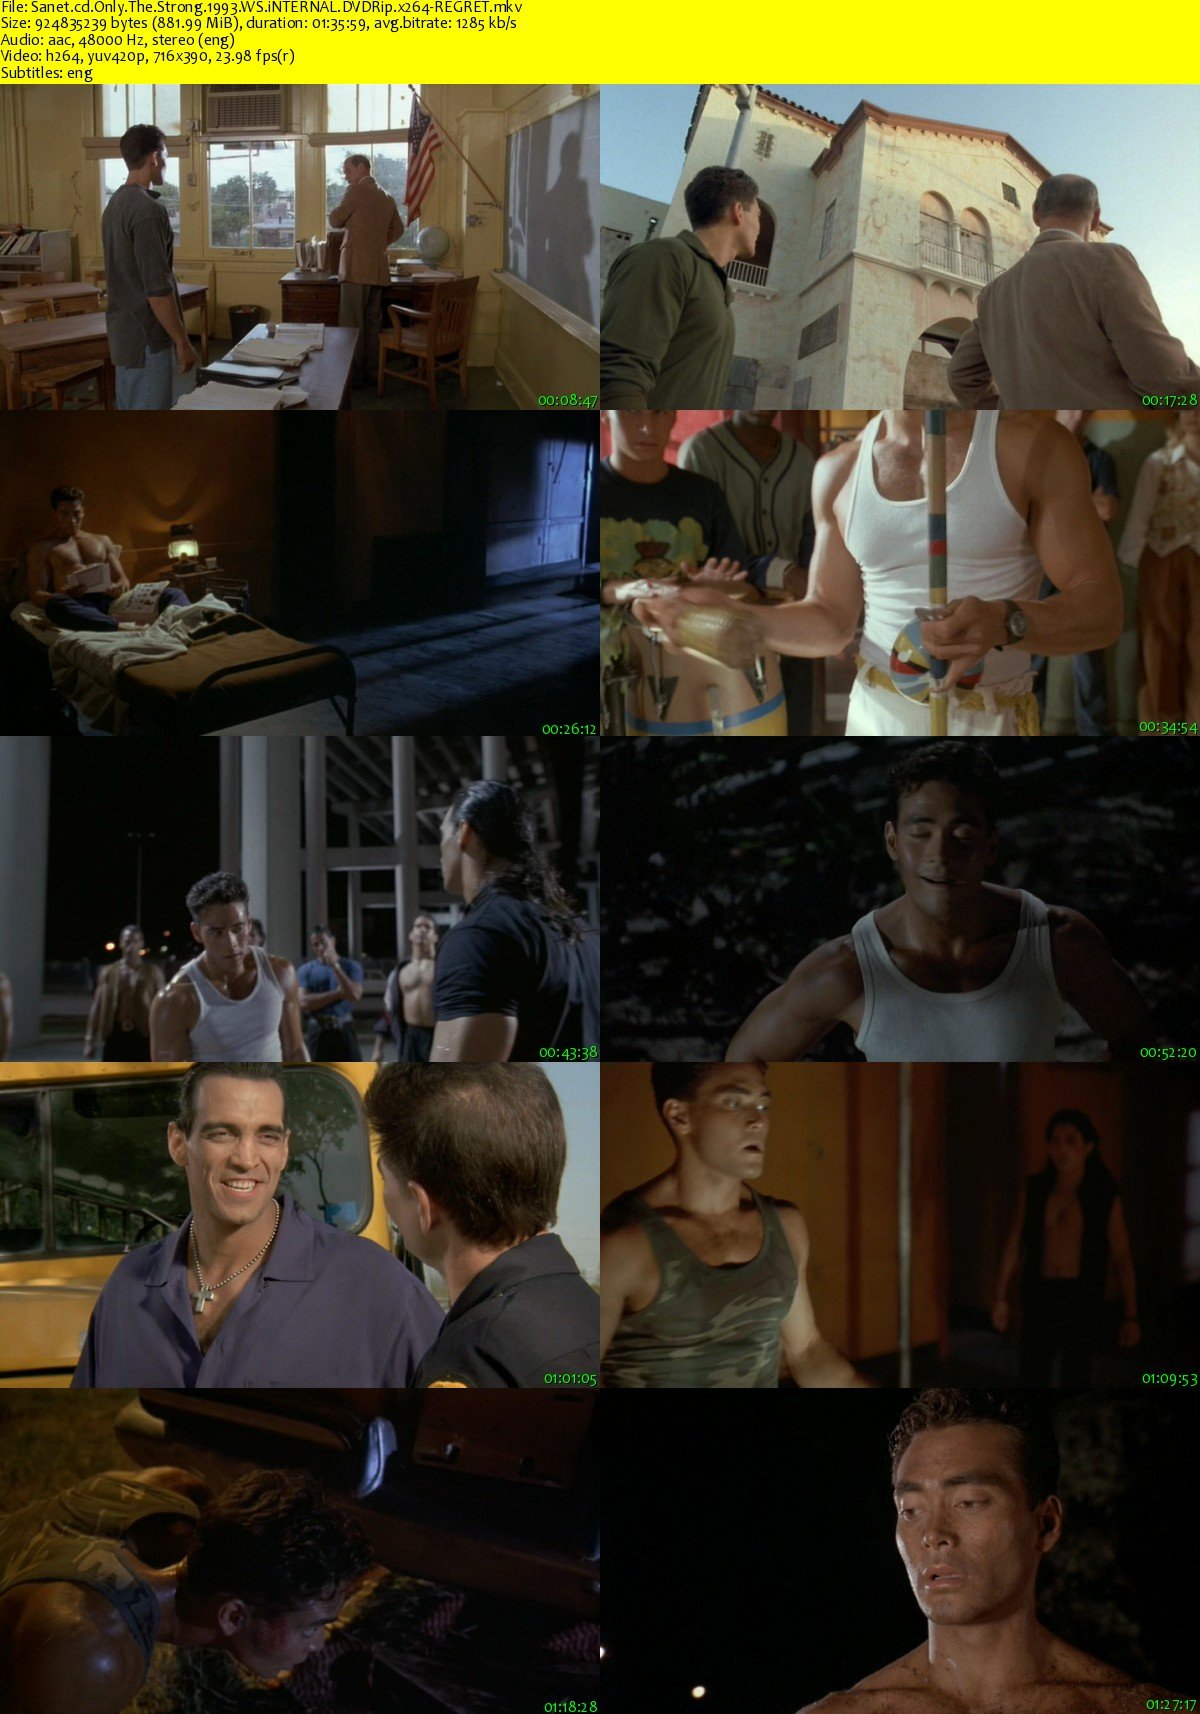 only the strong mark dacascos free download